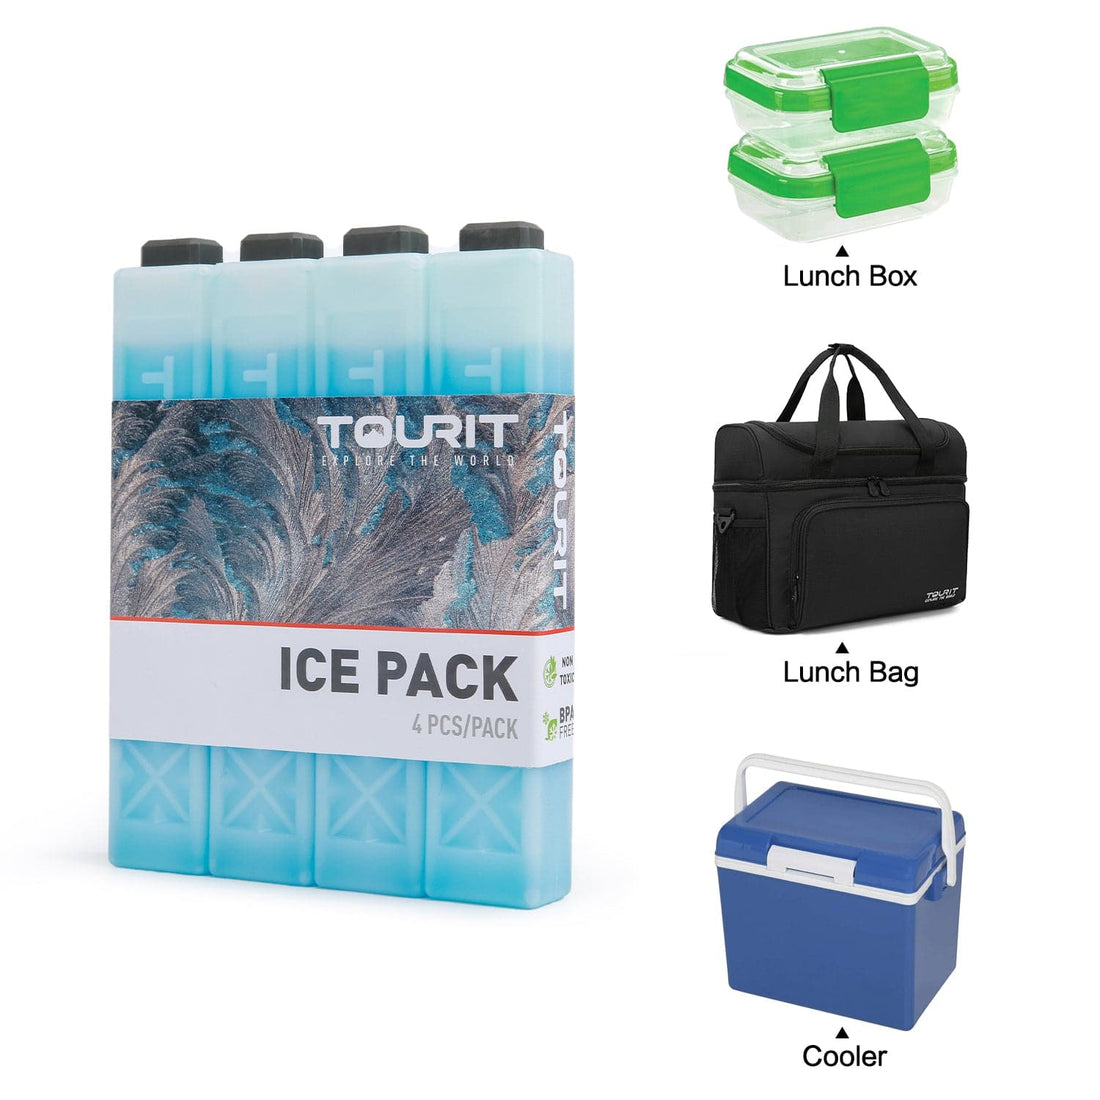  TruHealth Ice Packs for Lunch Bags - Reusable Ice Packs for  Cooler and Lunch Box - Long Lasting, Lightweight, Soft Gel Ice Packs for  Camping, Beach Bags, Picnics, Injuries - Pack